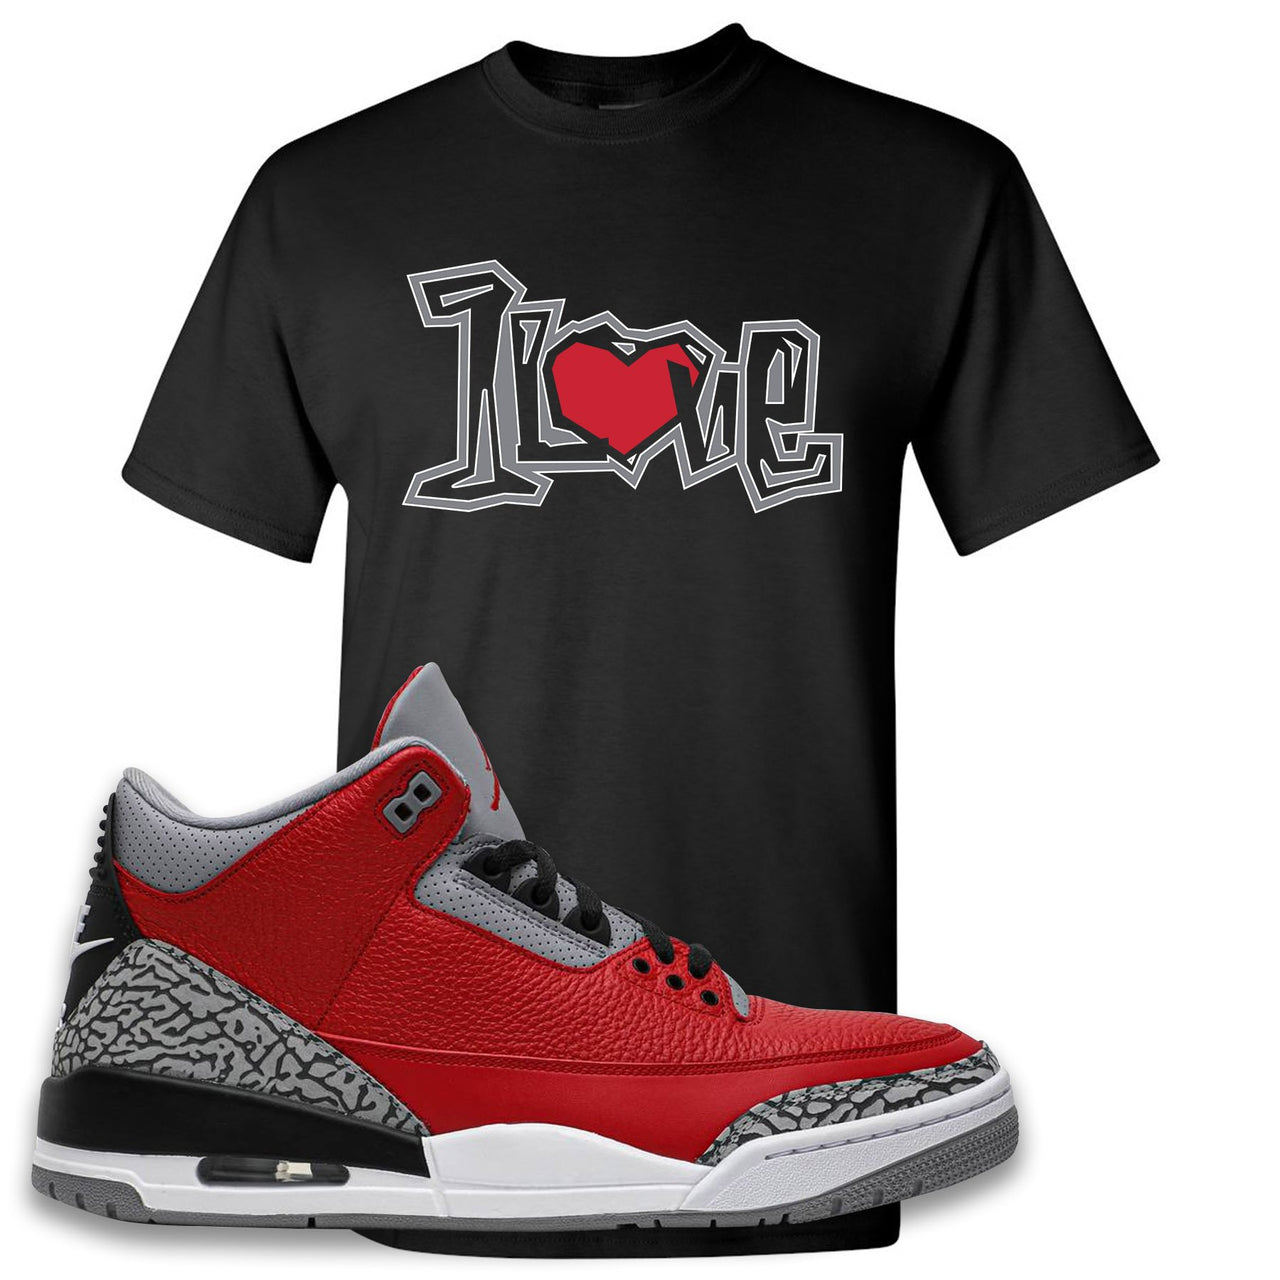 Jordan 3 Red Cement Chicago All-Star Sneaker Black T Shirt | Tees to match Jordan 3 All Star Red Cement Shoes | 1 Love